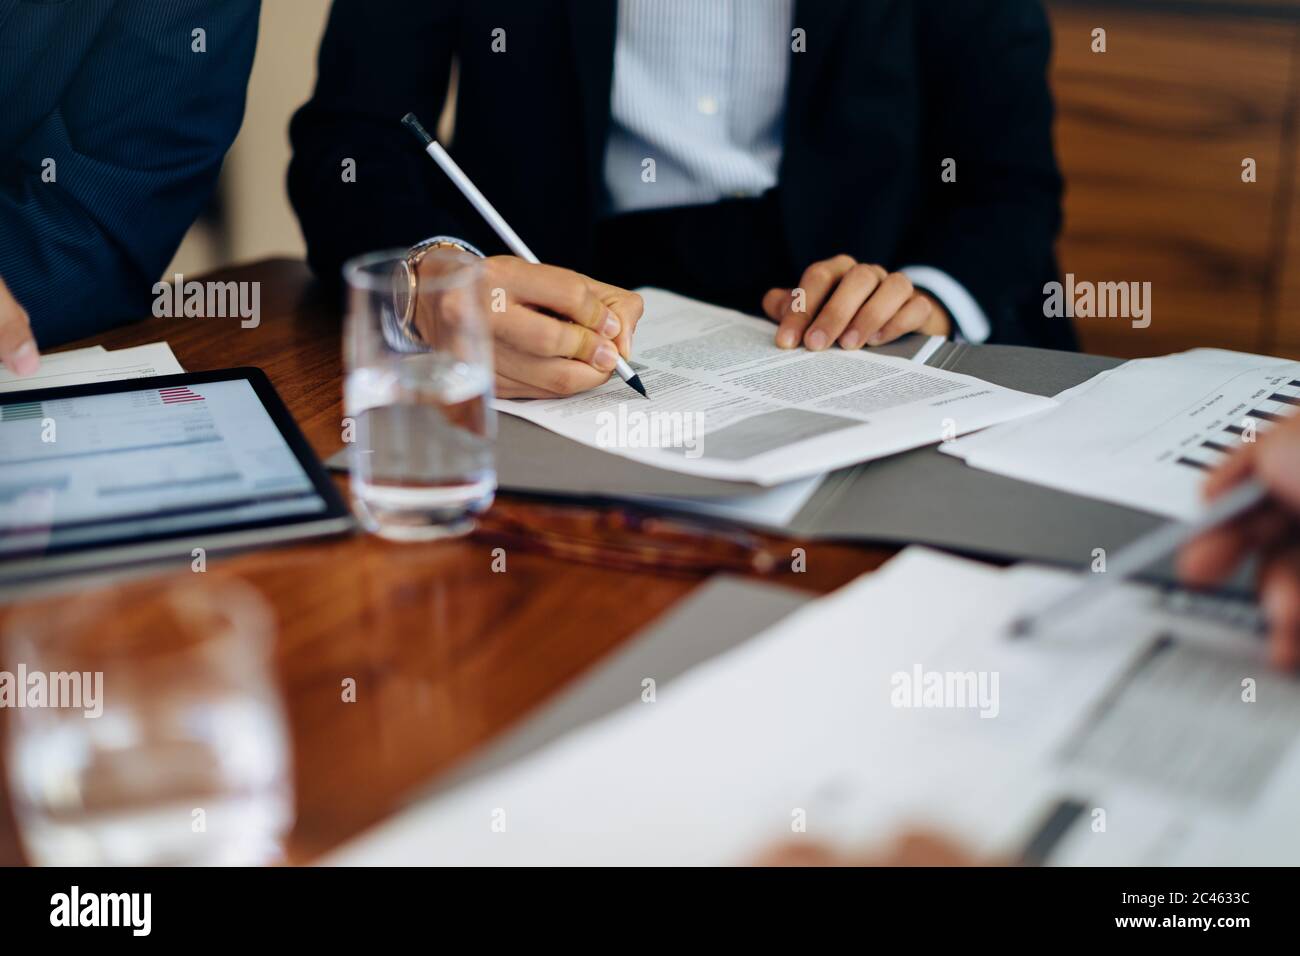 Businessmen and woman at boardroom table working on paperwork, cropped Stock Photo